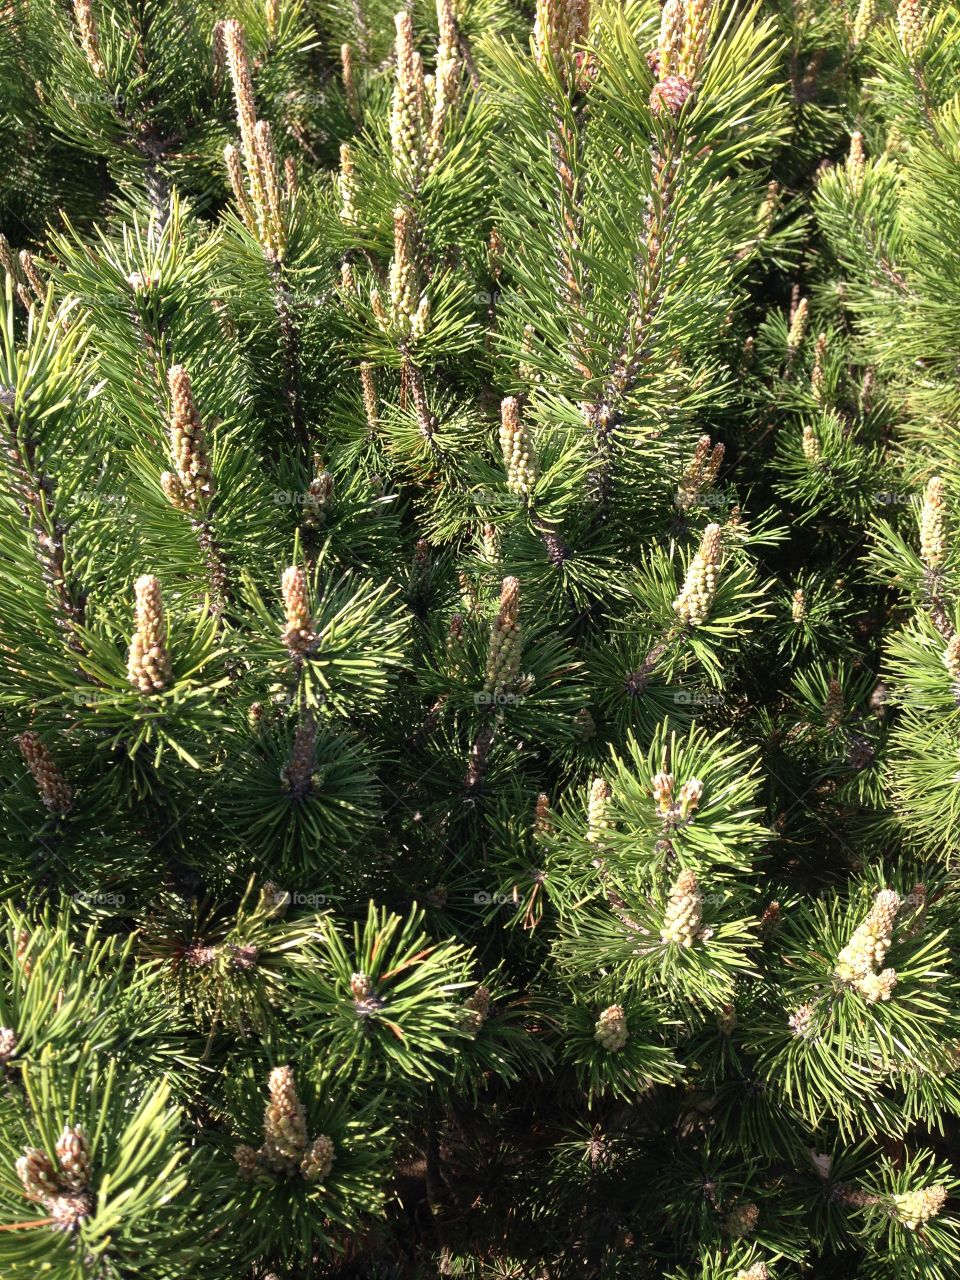 Prickly pine